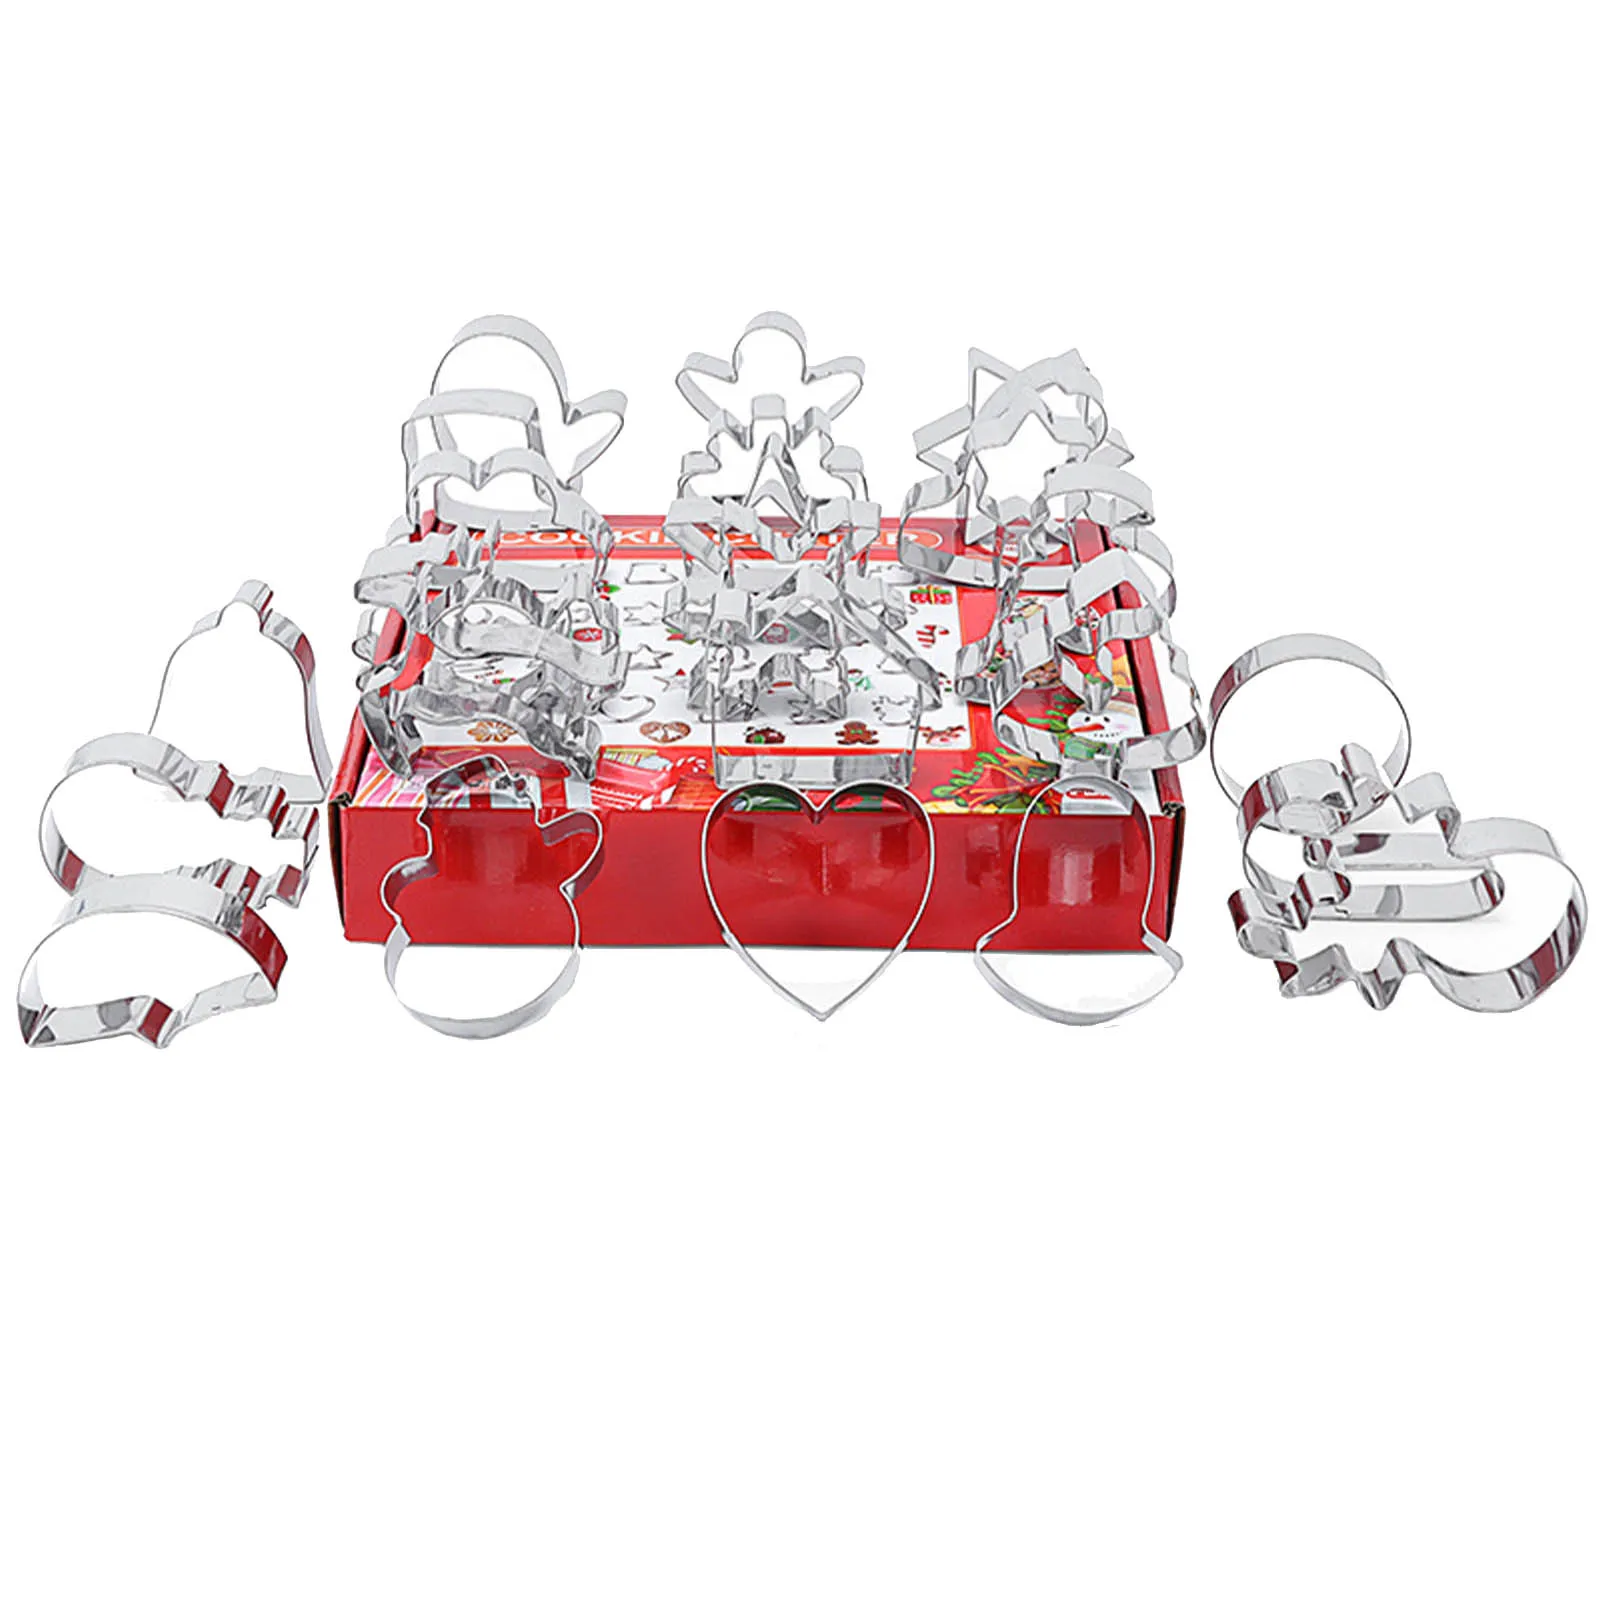 

Christmas Cookie Cutters Set 24pcs Stainless Steel Christmas Shapes Cookie Cutters Holiday Winter Christmas Cookies Molds Party